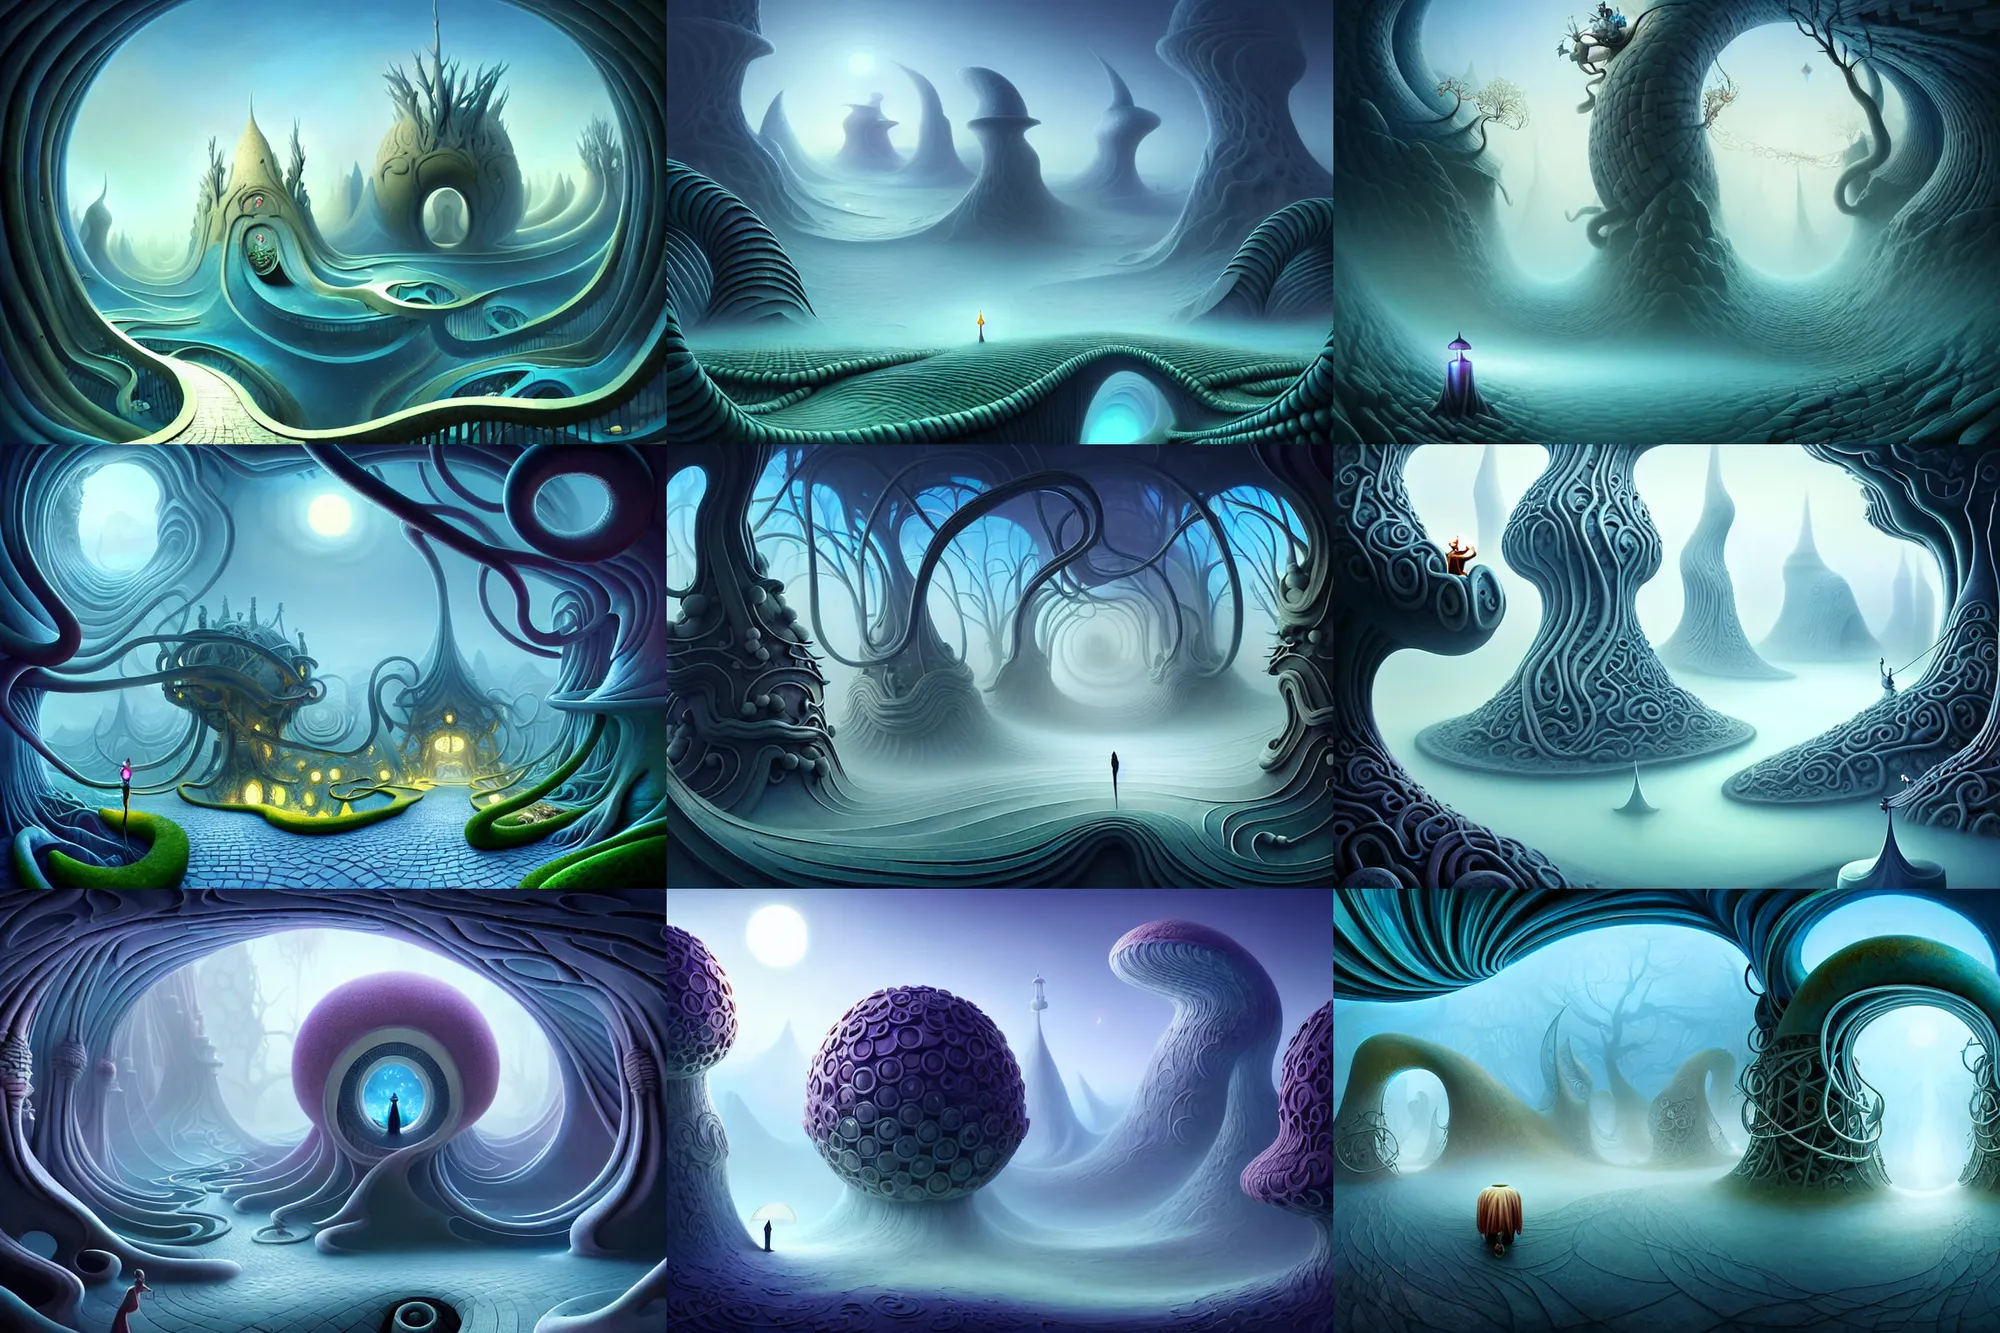 Prompt: an whimsical masterpiece elite mysterious sci - fi fantasy matte painting of a winding path through arctic dream worlds with surreal architecture designed by heironymous bosch, structures inspired by heironymous bosch's garden of earthly delights, surreal ice interiors by cyril rolando and asher durand and natalie shau and cyril rolando, insanely detailed and intricate, complex, elegant, quirky